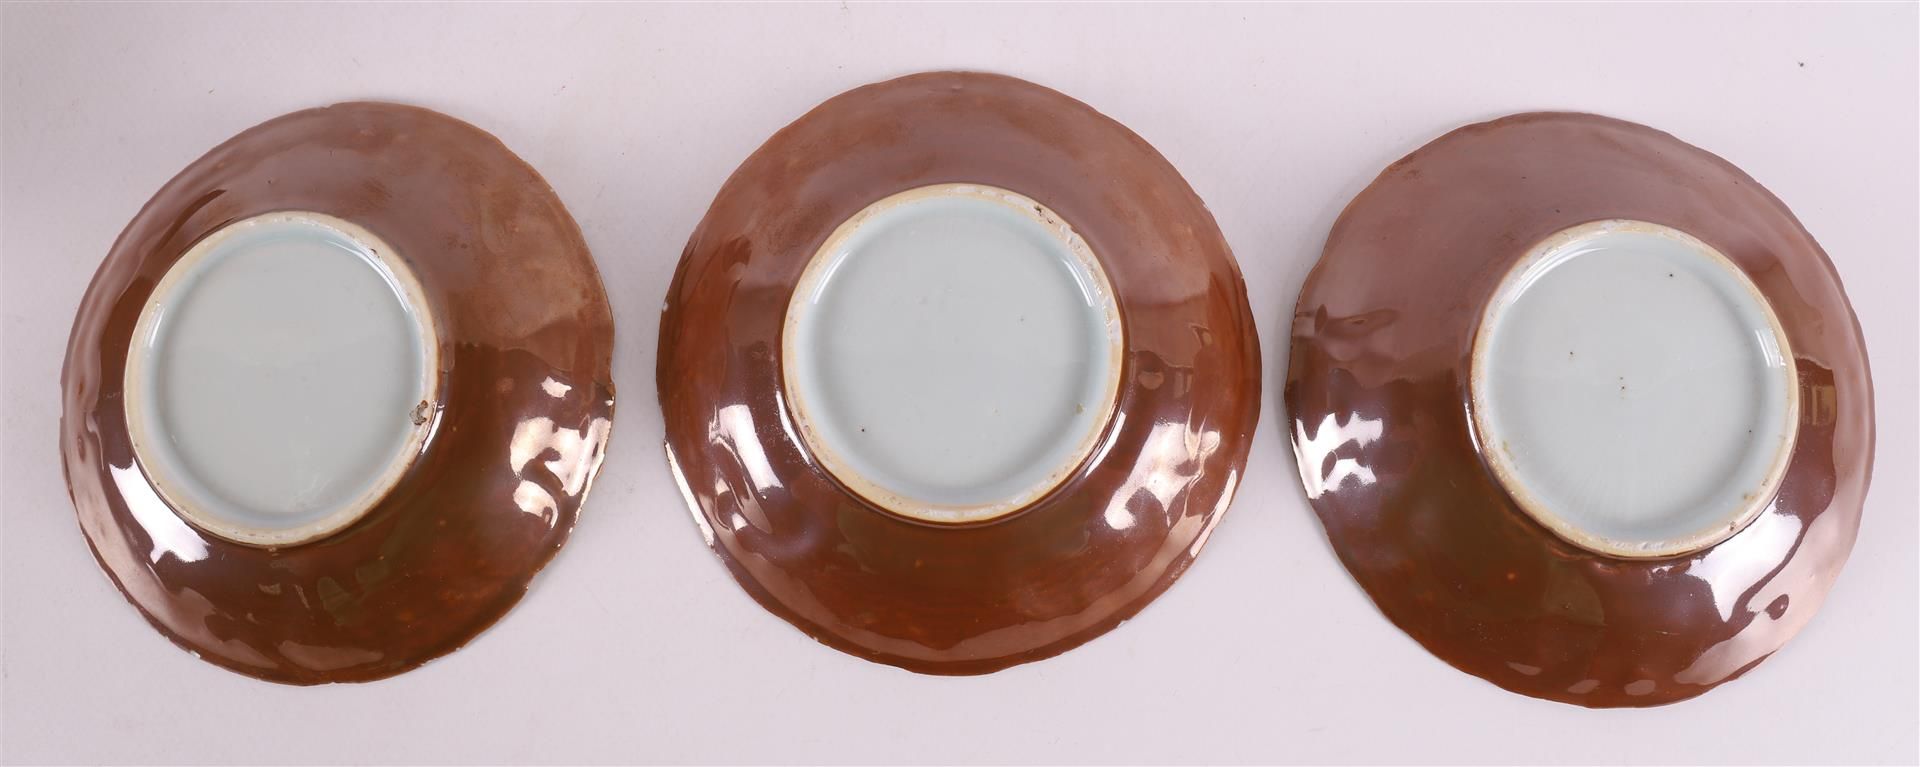 A series of five capucine porcelain cups and saucers, China, 18th century. - Bild 8 aus 15